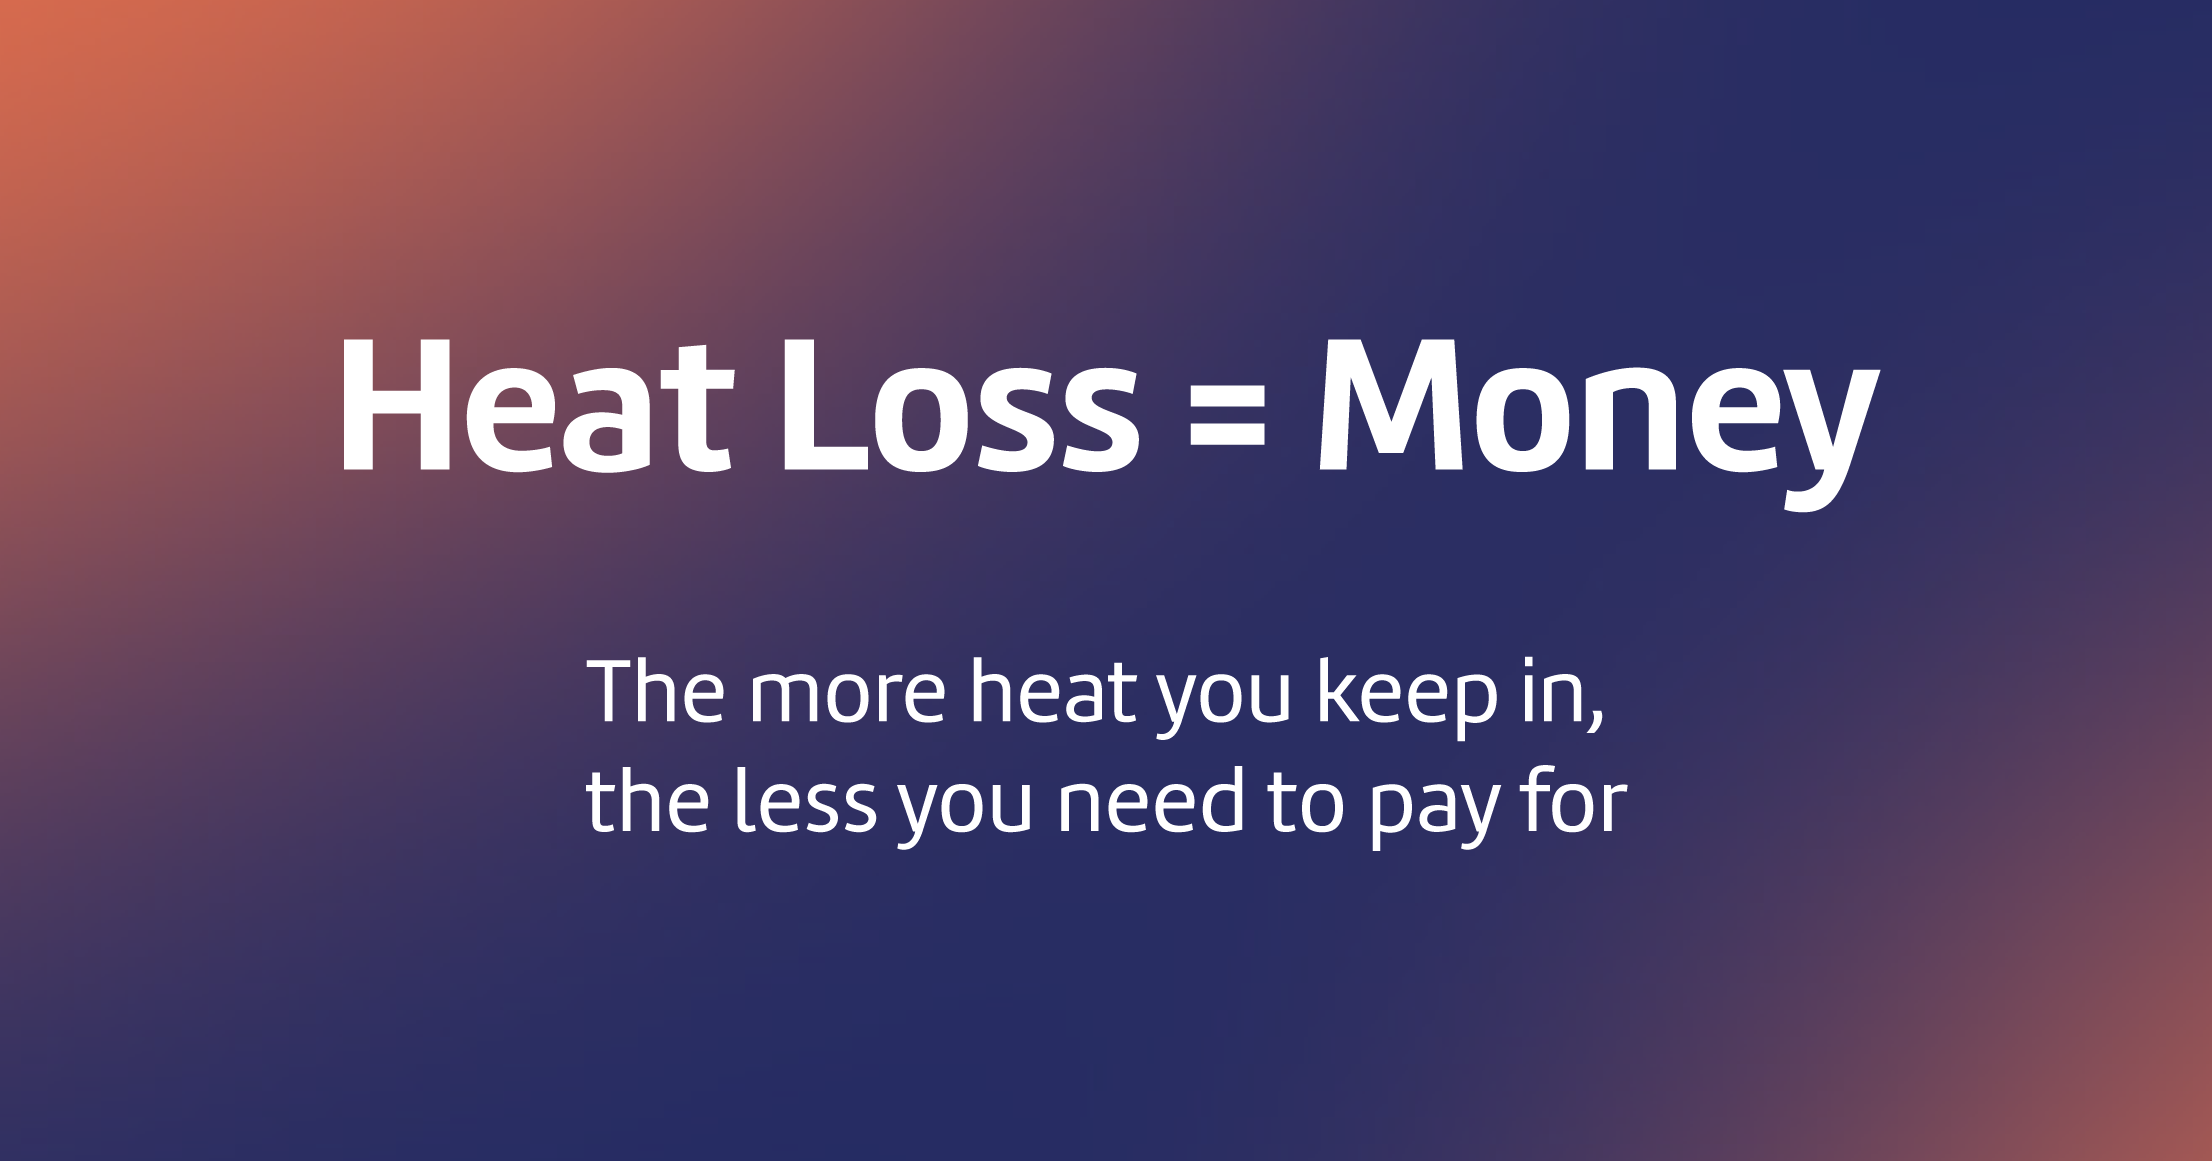 Heat loss means lost money